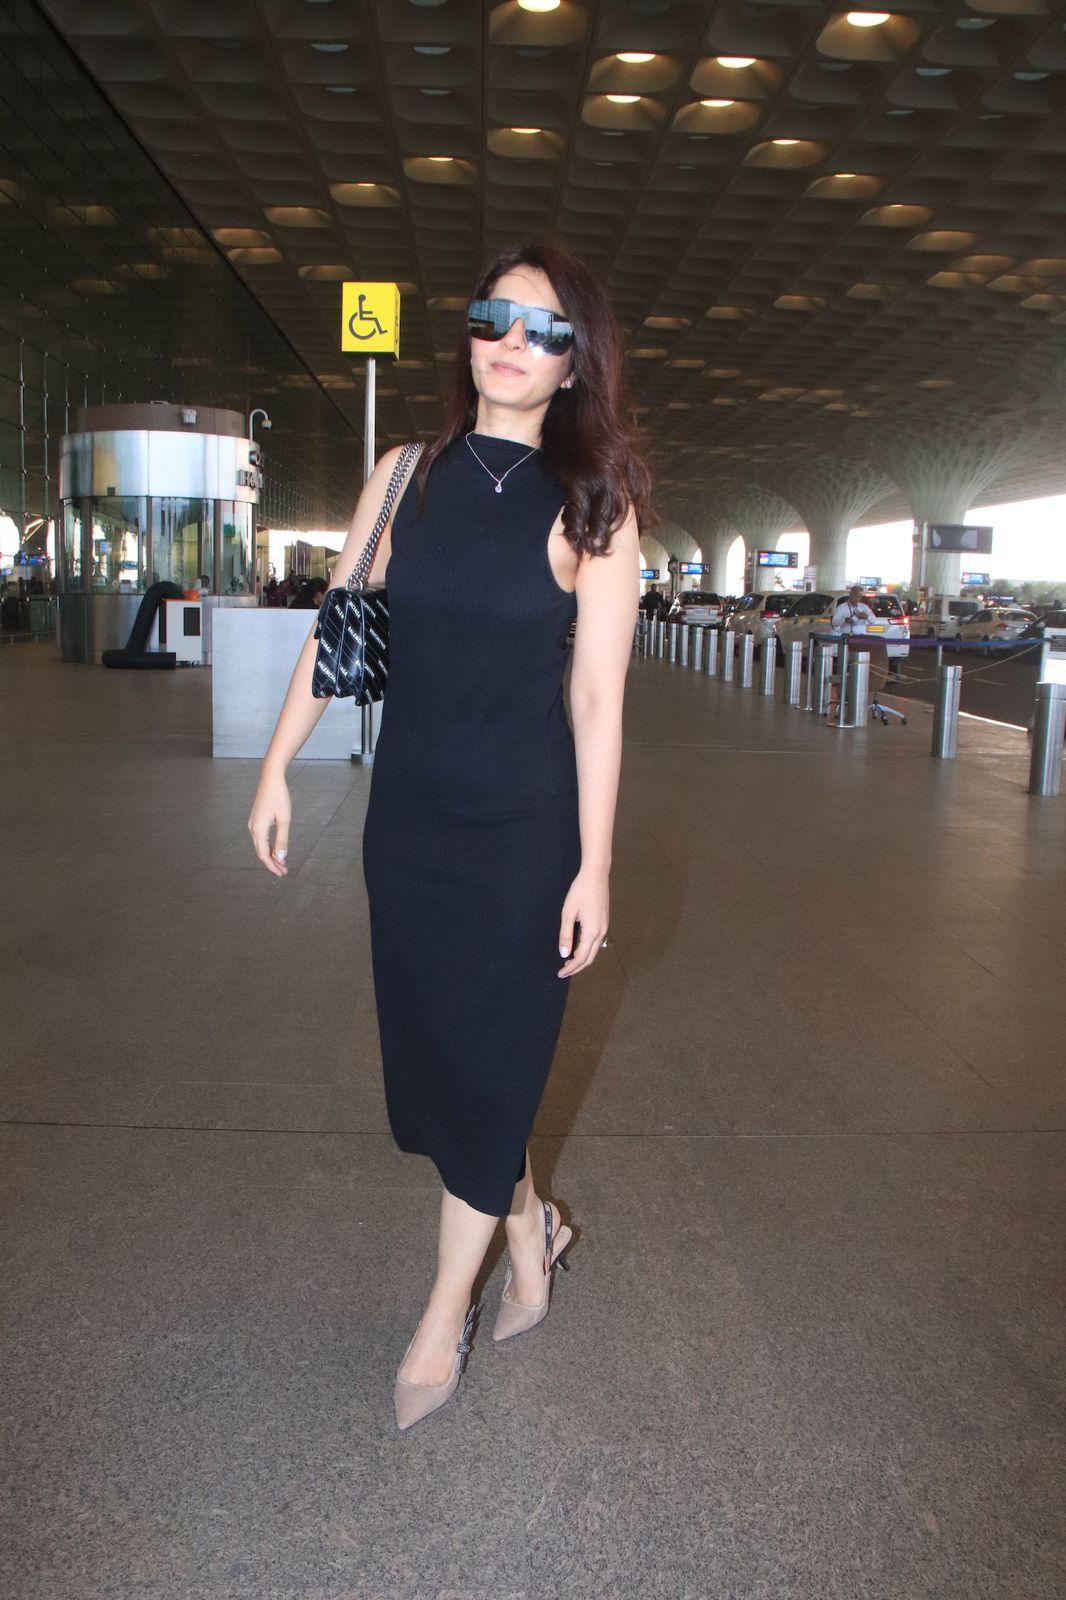 Raashi Khanna was spotted looking chic as ever at the Mumbai airport today